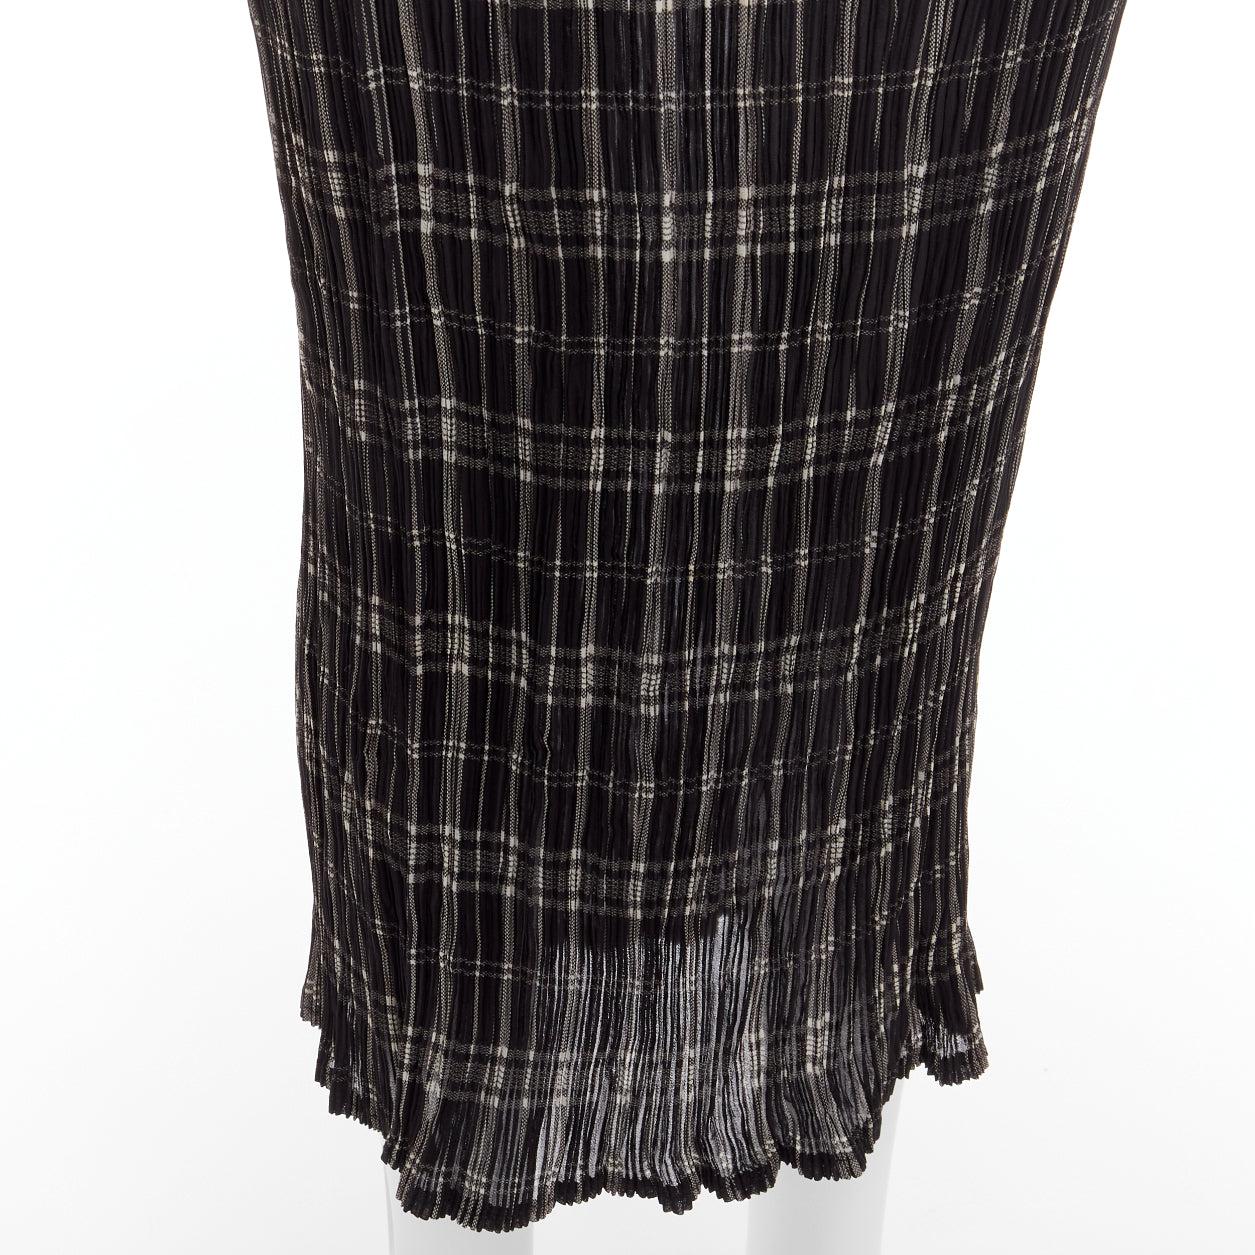 ISSEY MIYAKE Vintage black white plaid check elasticated crinkled midi skirt S
Reference: PYCN/A00087
Brand: Issey Miyake
Collection: Pleats Please
Material: Polyester
Color: Black, White
Pattern: Plaid
Closure: Elasticated
Made in: